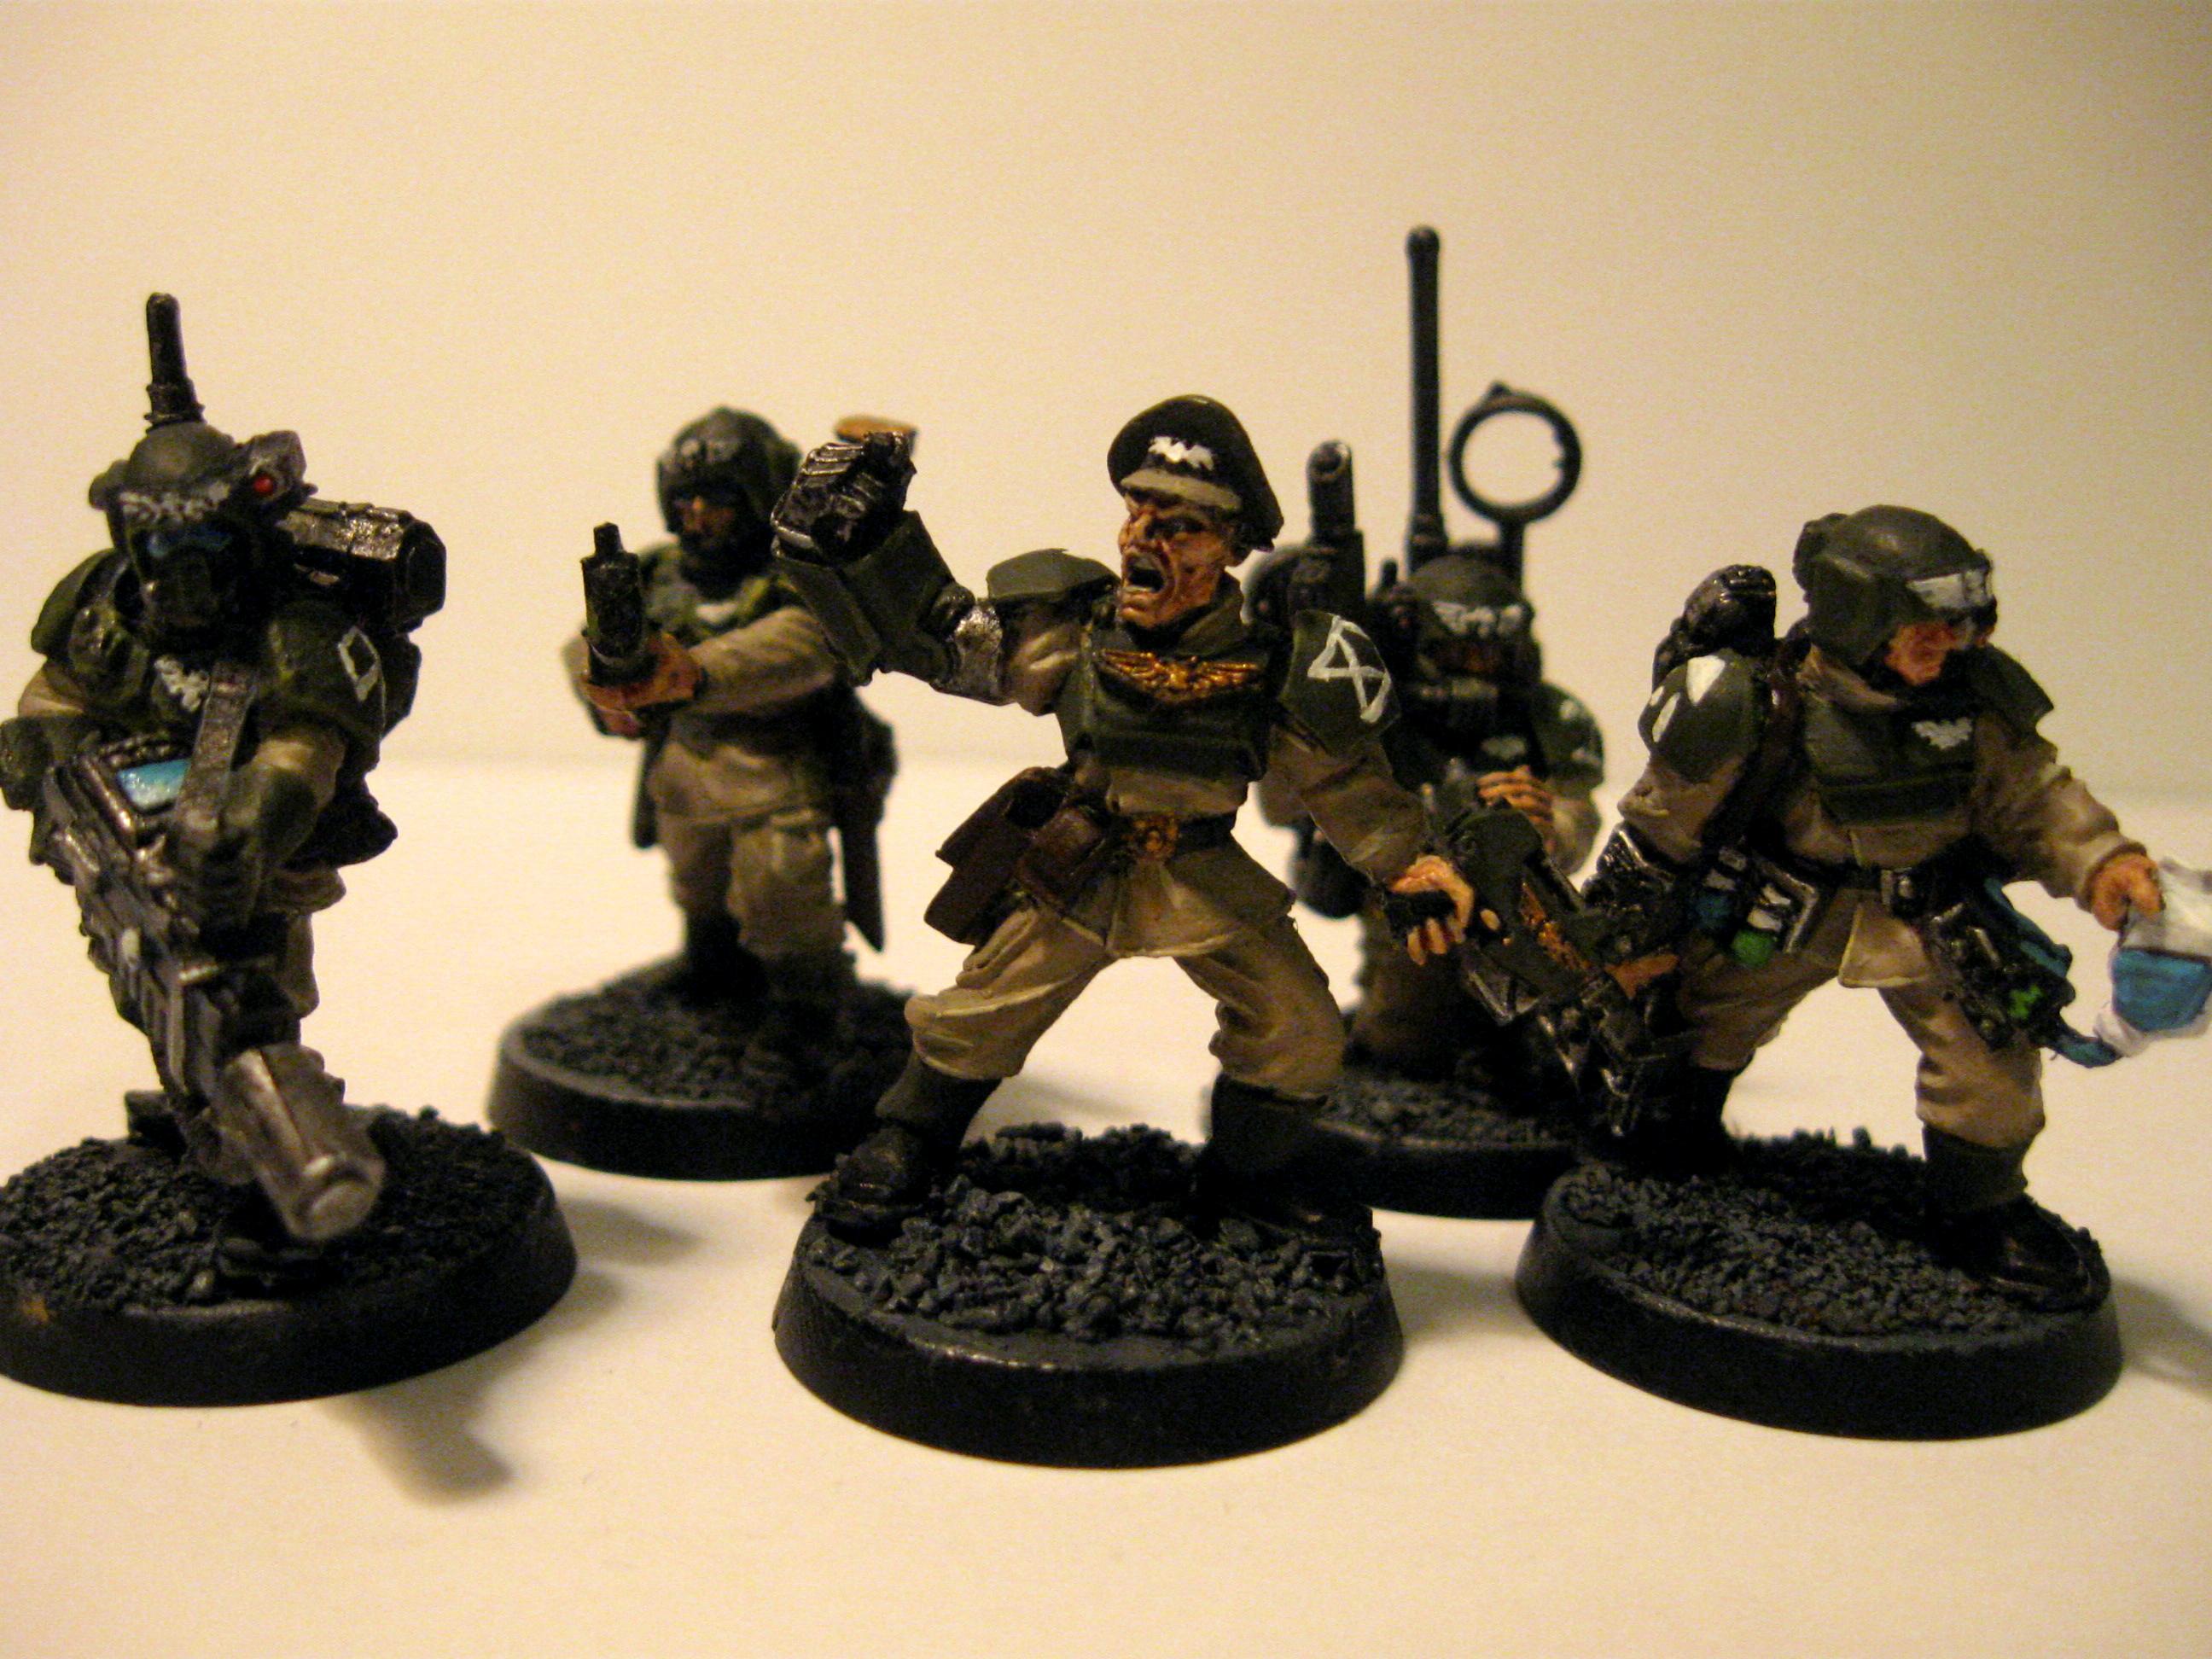 Cadians, Command Squad, Imperial Guard, Medic, Meltagun, Power Fist, Warhammer 40,000